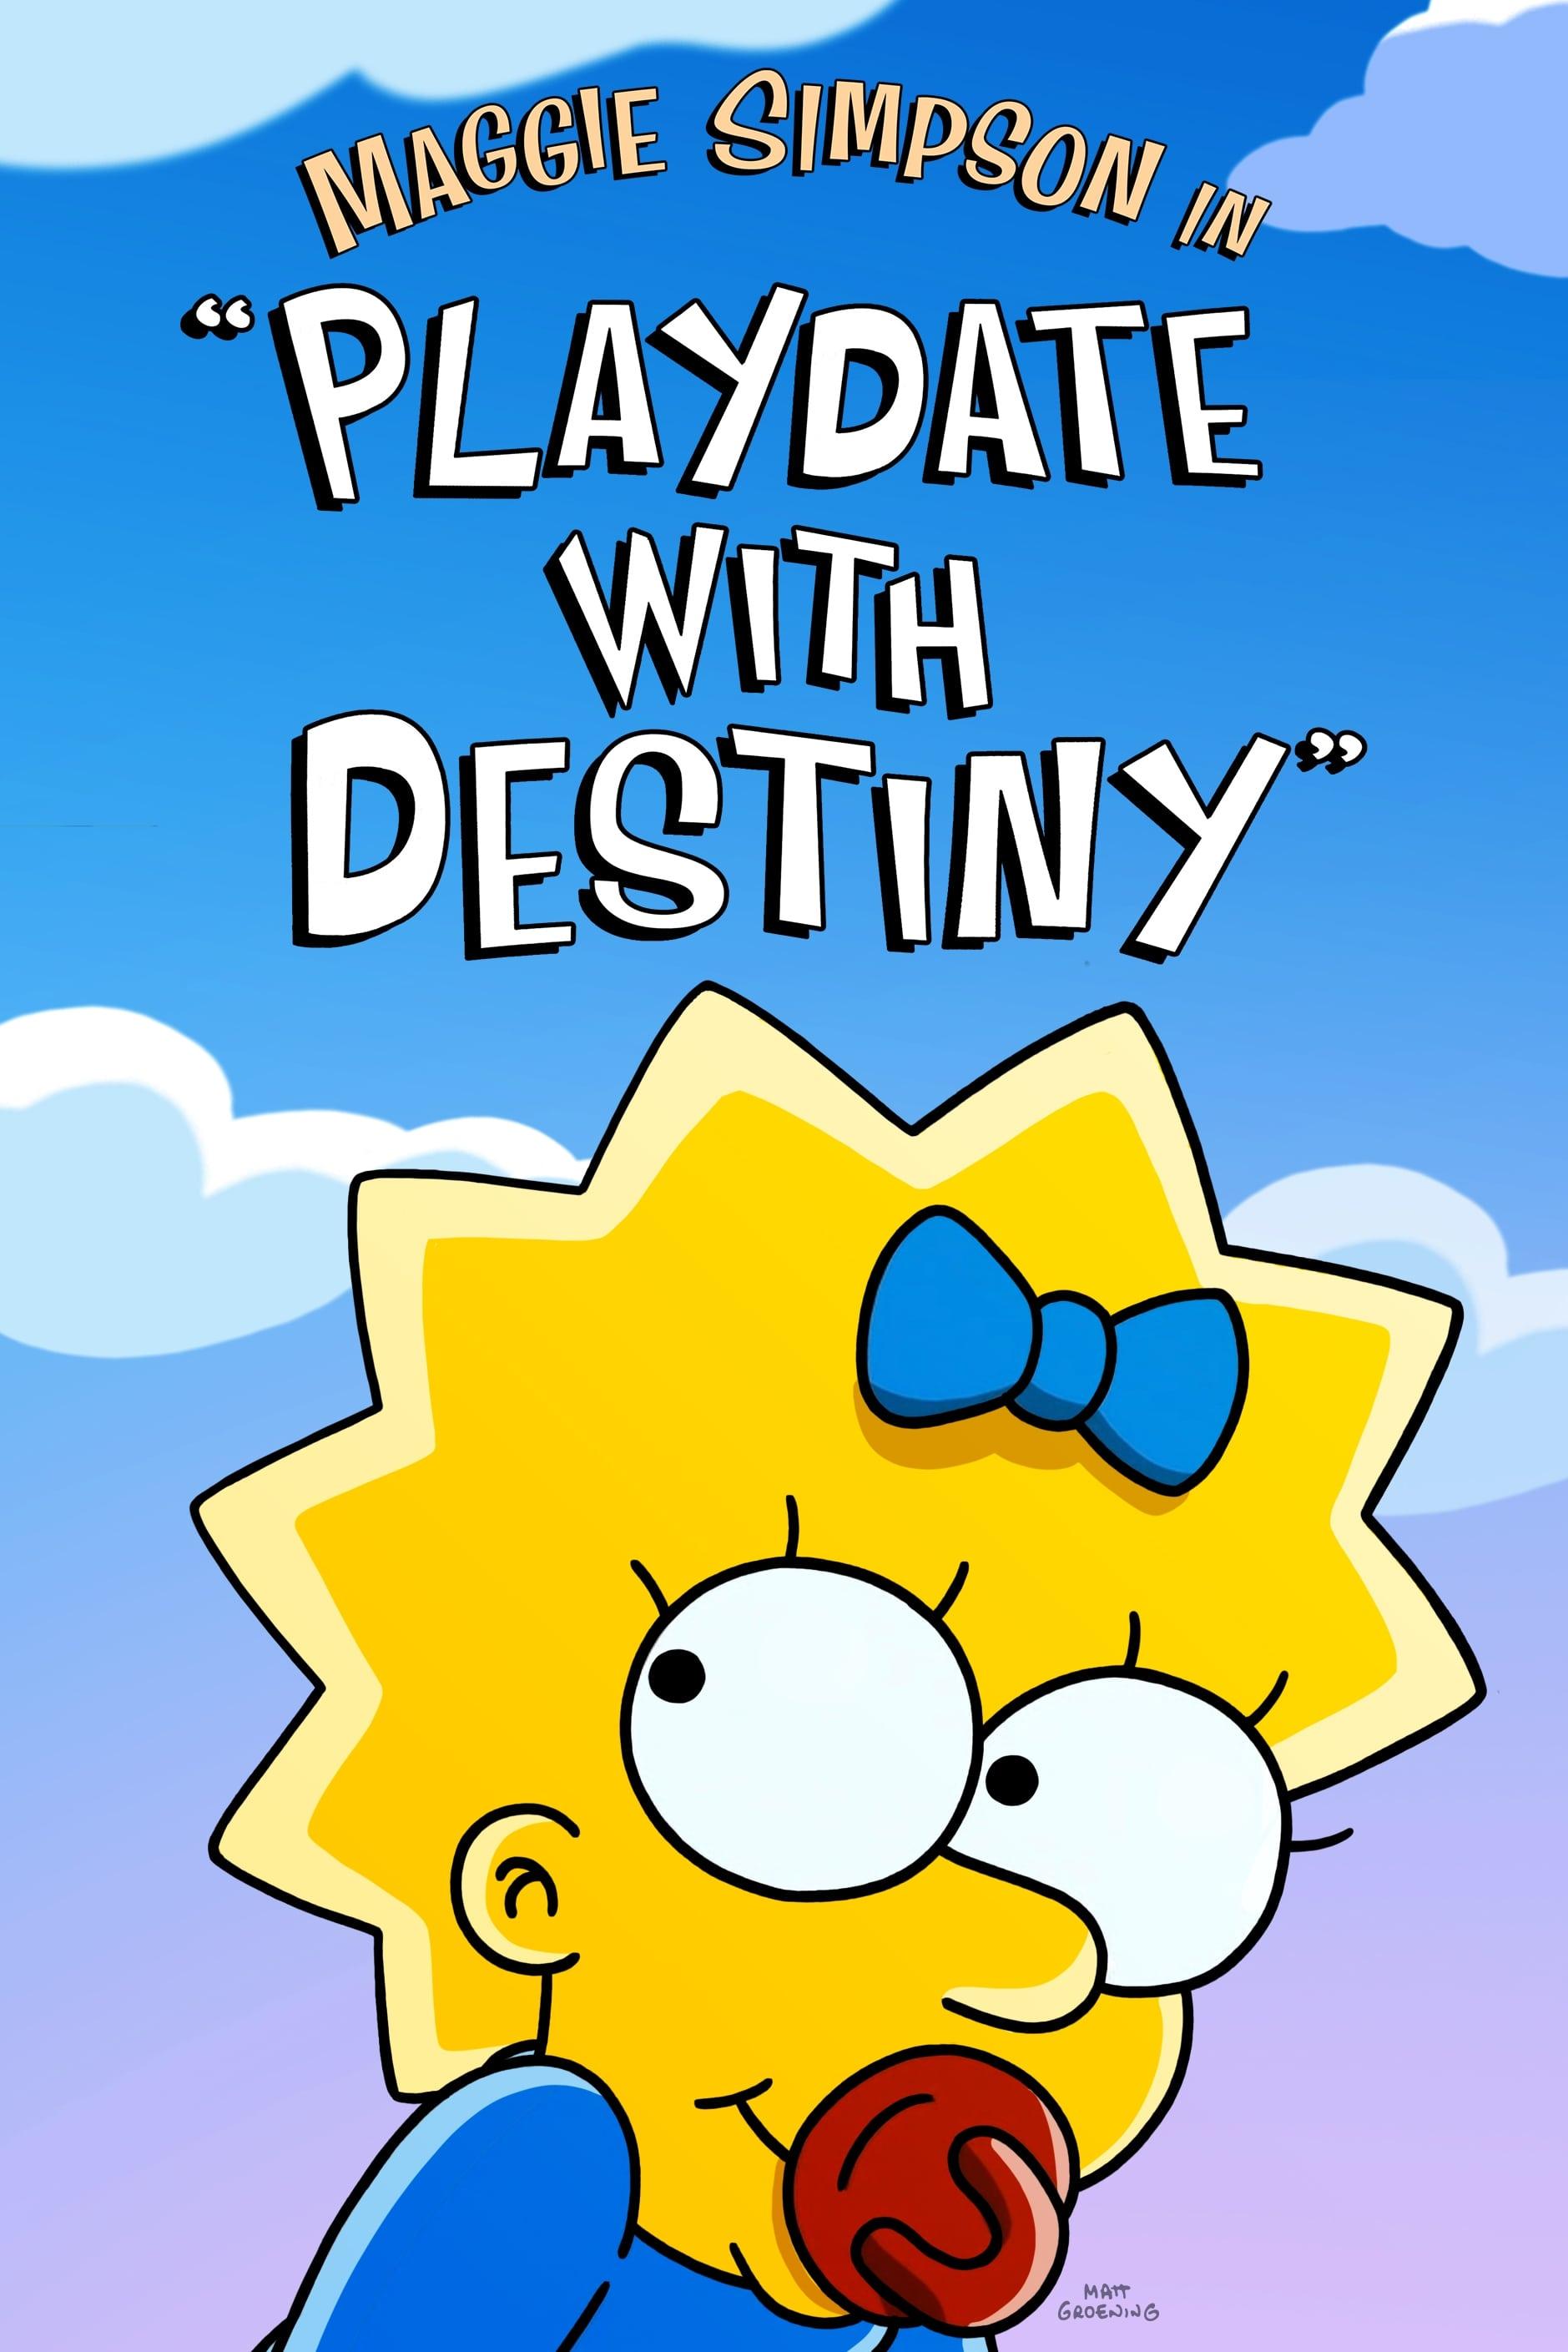 Maggie Simpson in "Playdate with Destiny" poster